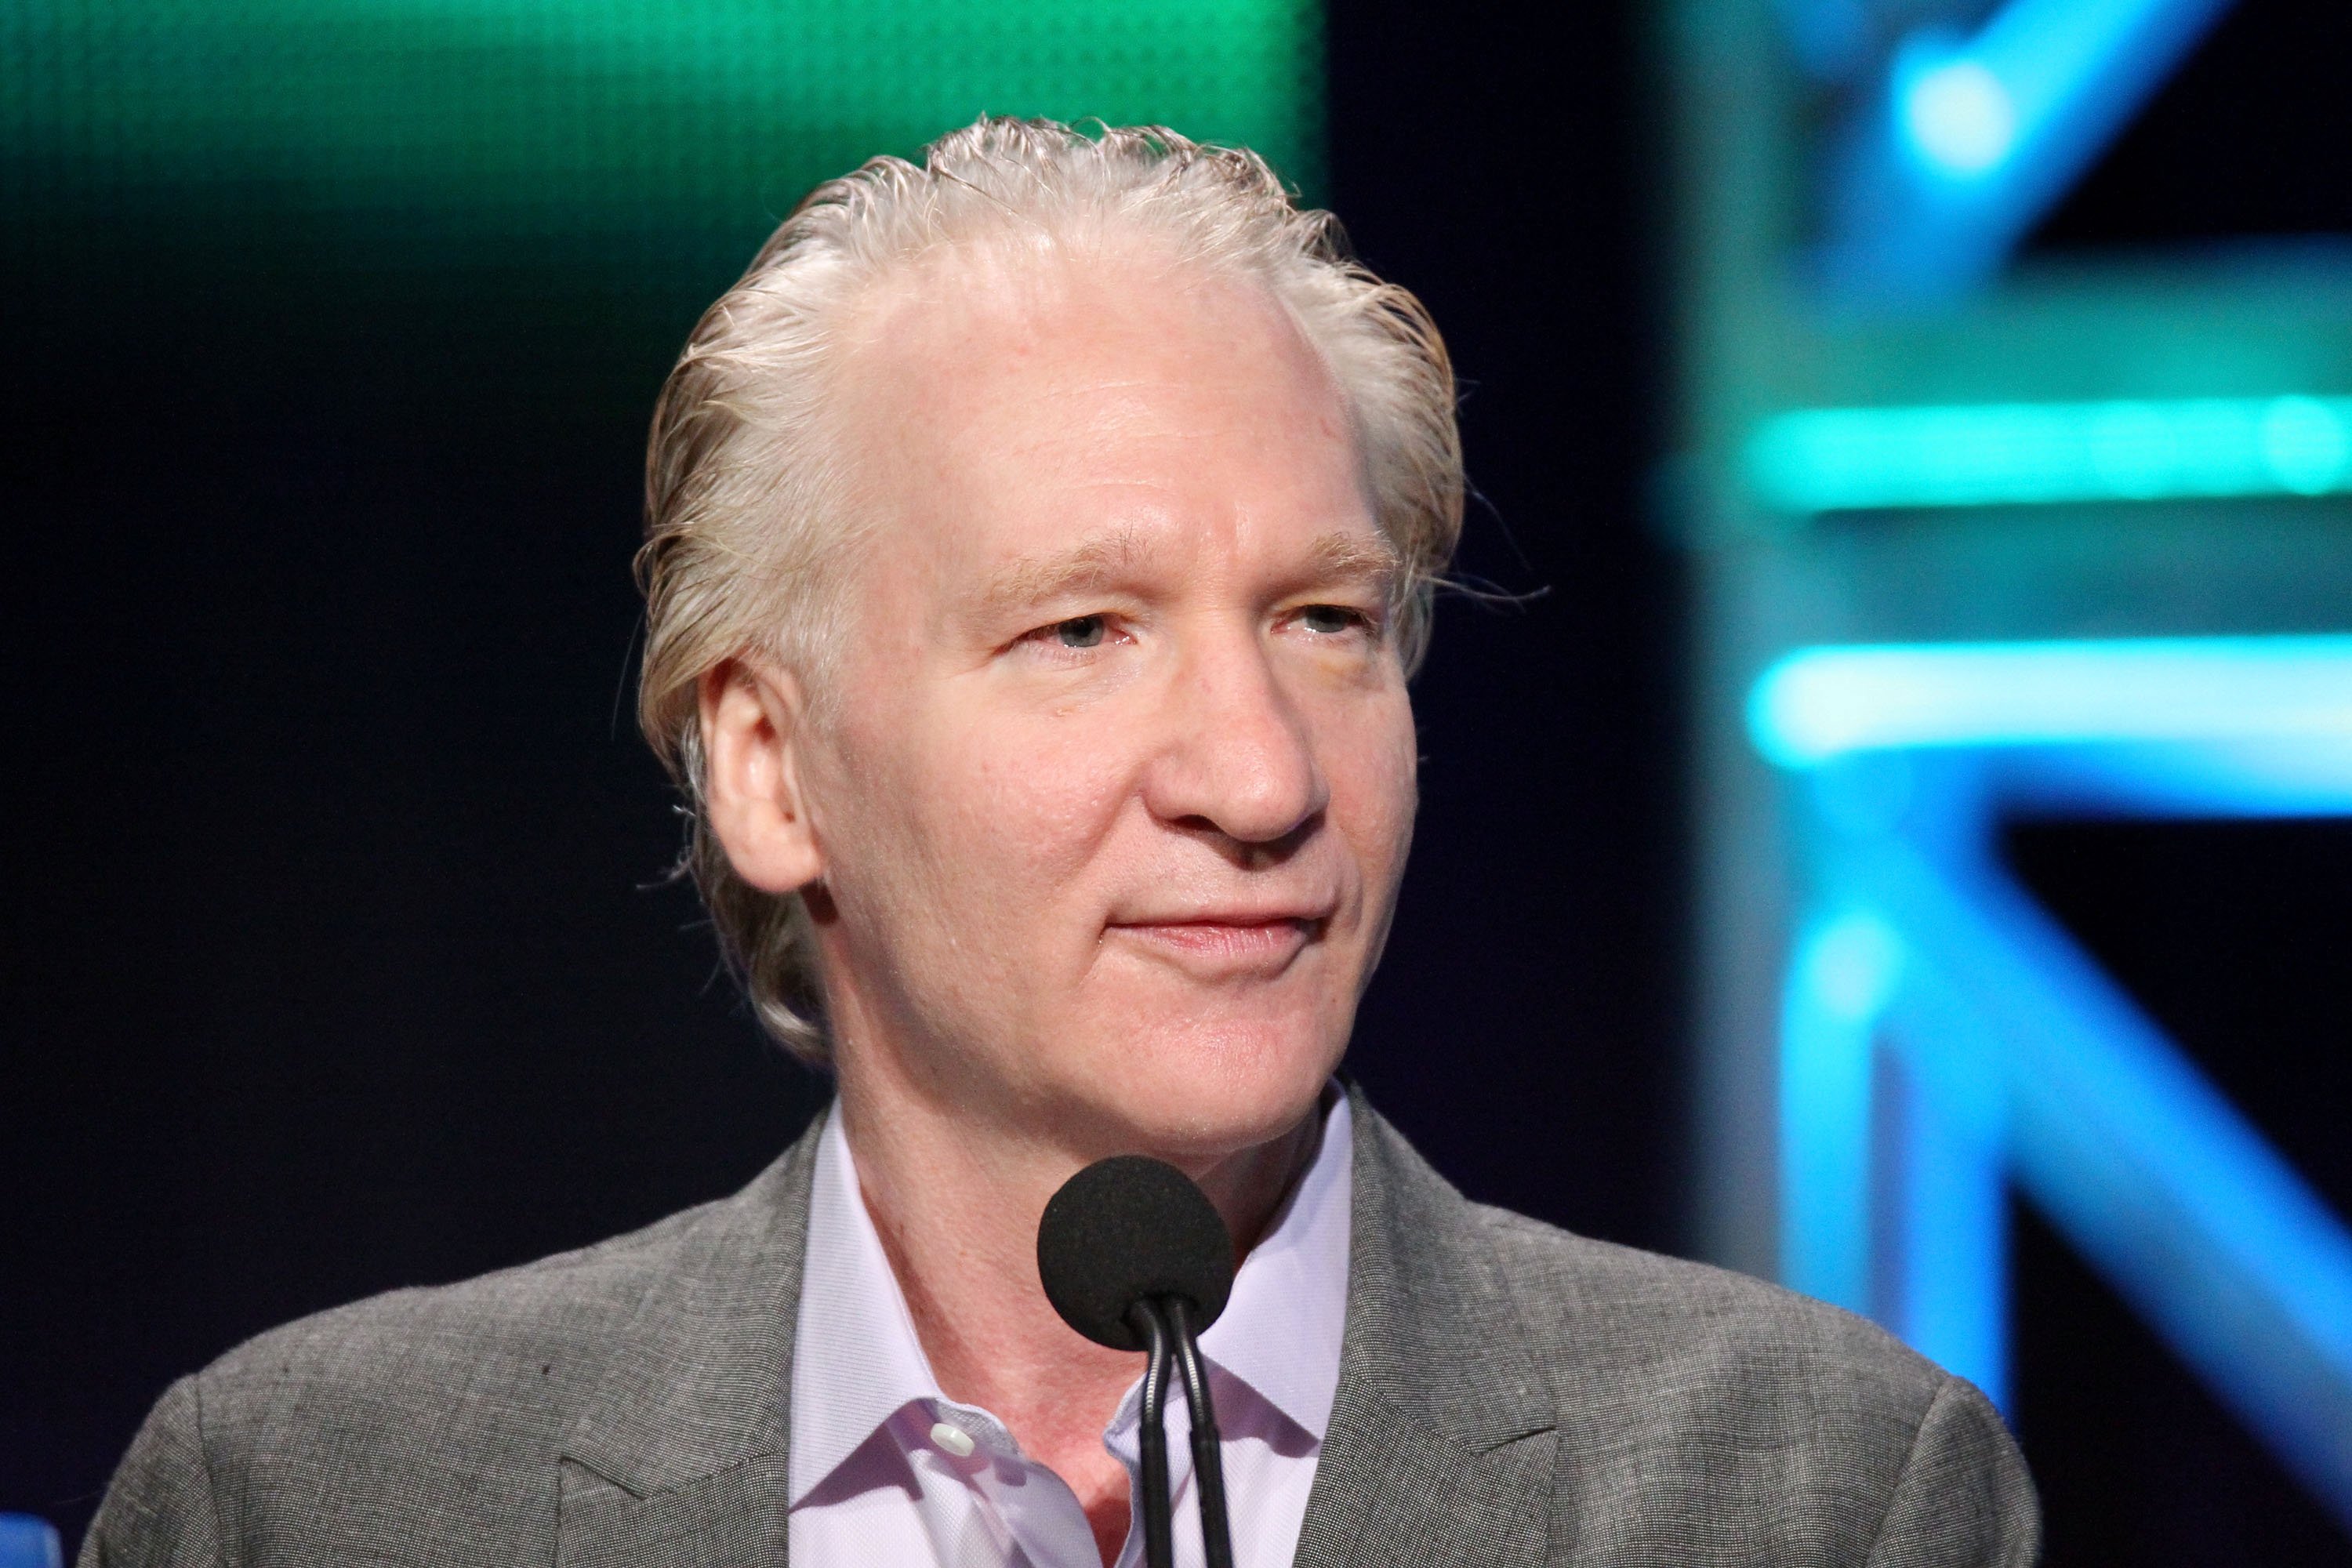 Bill Maher speaks durng the HBO portion of the 2011 Summer TCA Tour held at the Beverly Hilton, Beverly Hills, on July 28, 2011